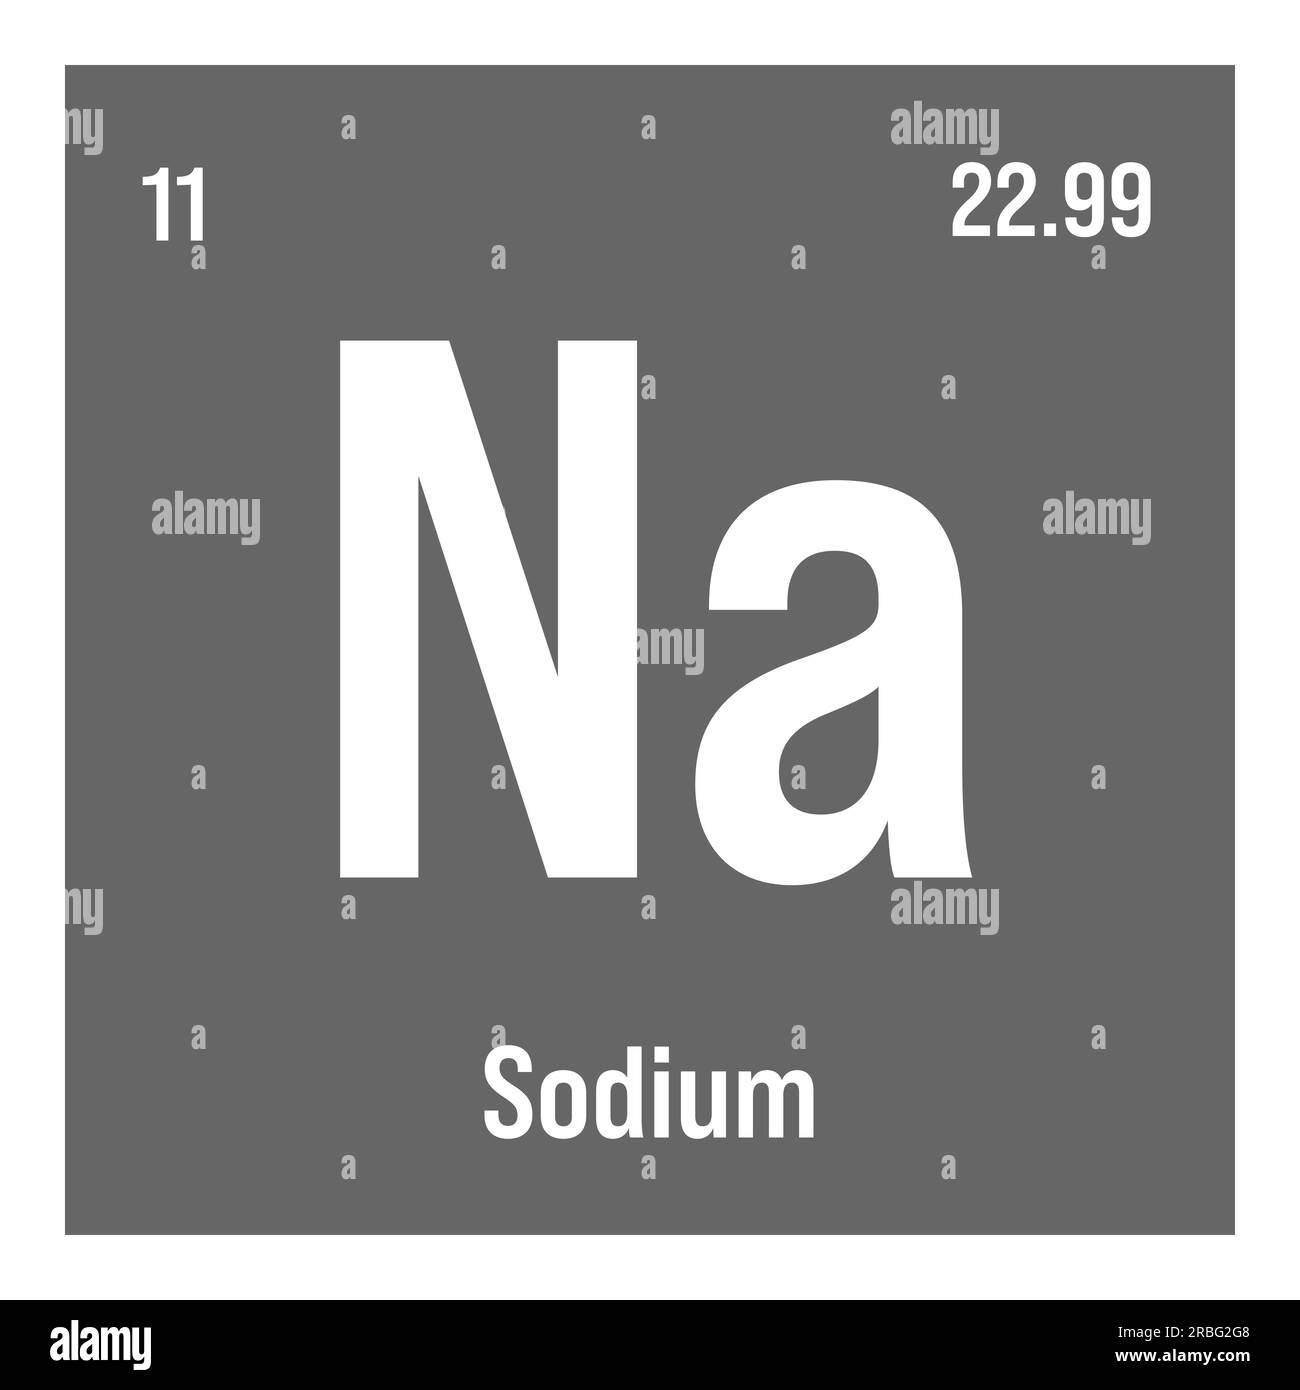 Sodium, Na, periodic table element with name, symbol, atomic number and weight. Alkali metal with various industrial uses, such as in soap, certain types of glass, and as a medication for certain medical conditions. Stock Vector